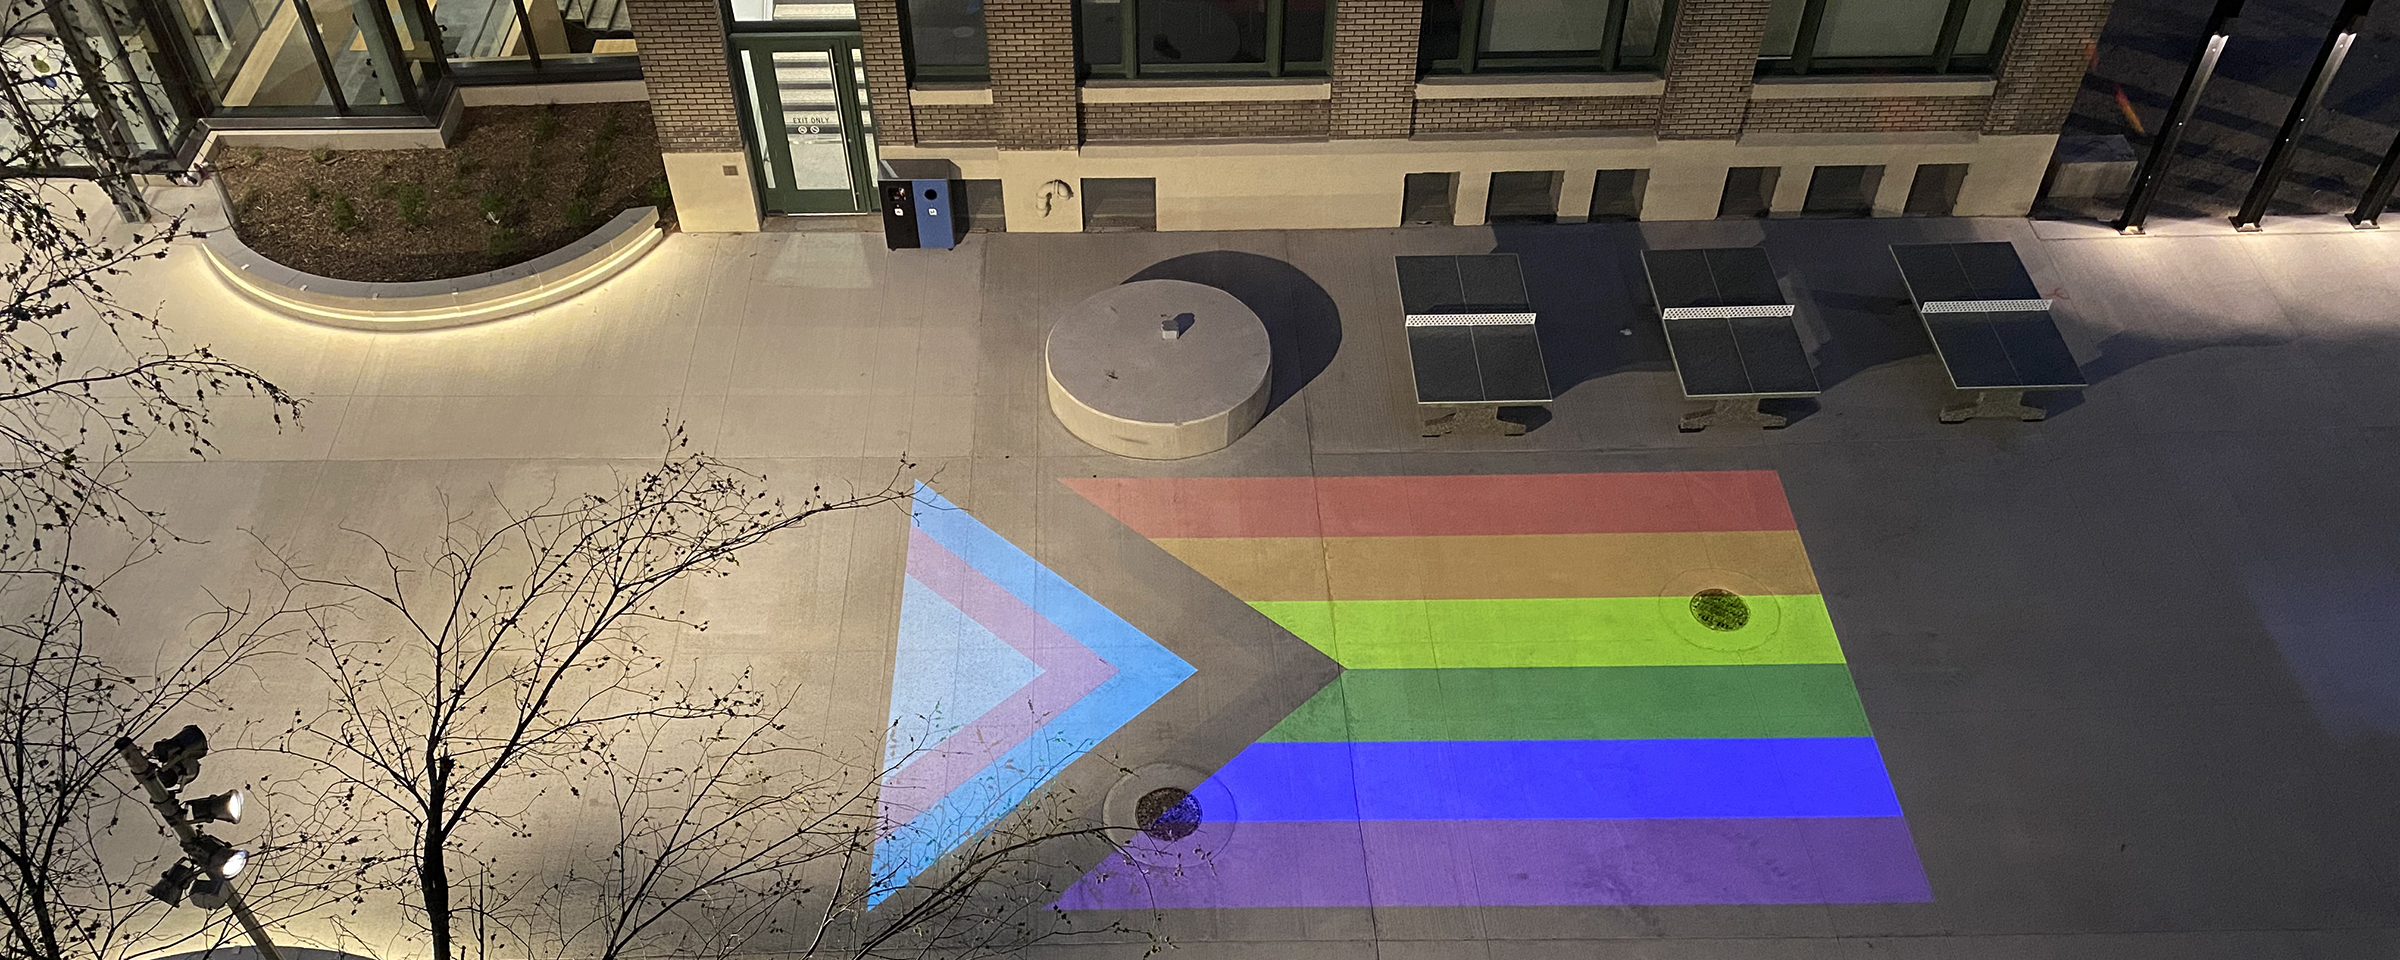 Progress Pride flag projection on the grounds of Elgin Avenue Plaza